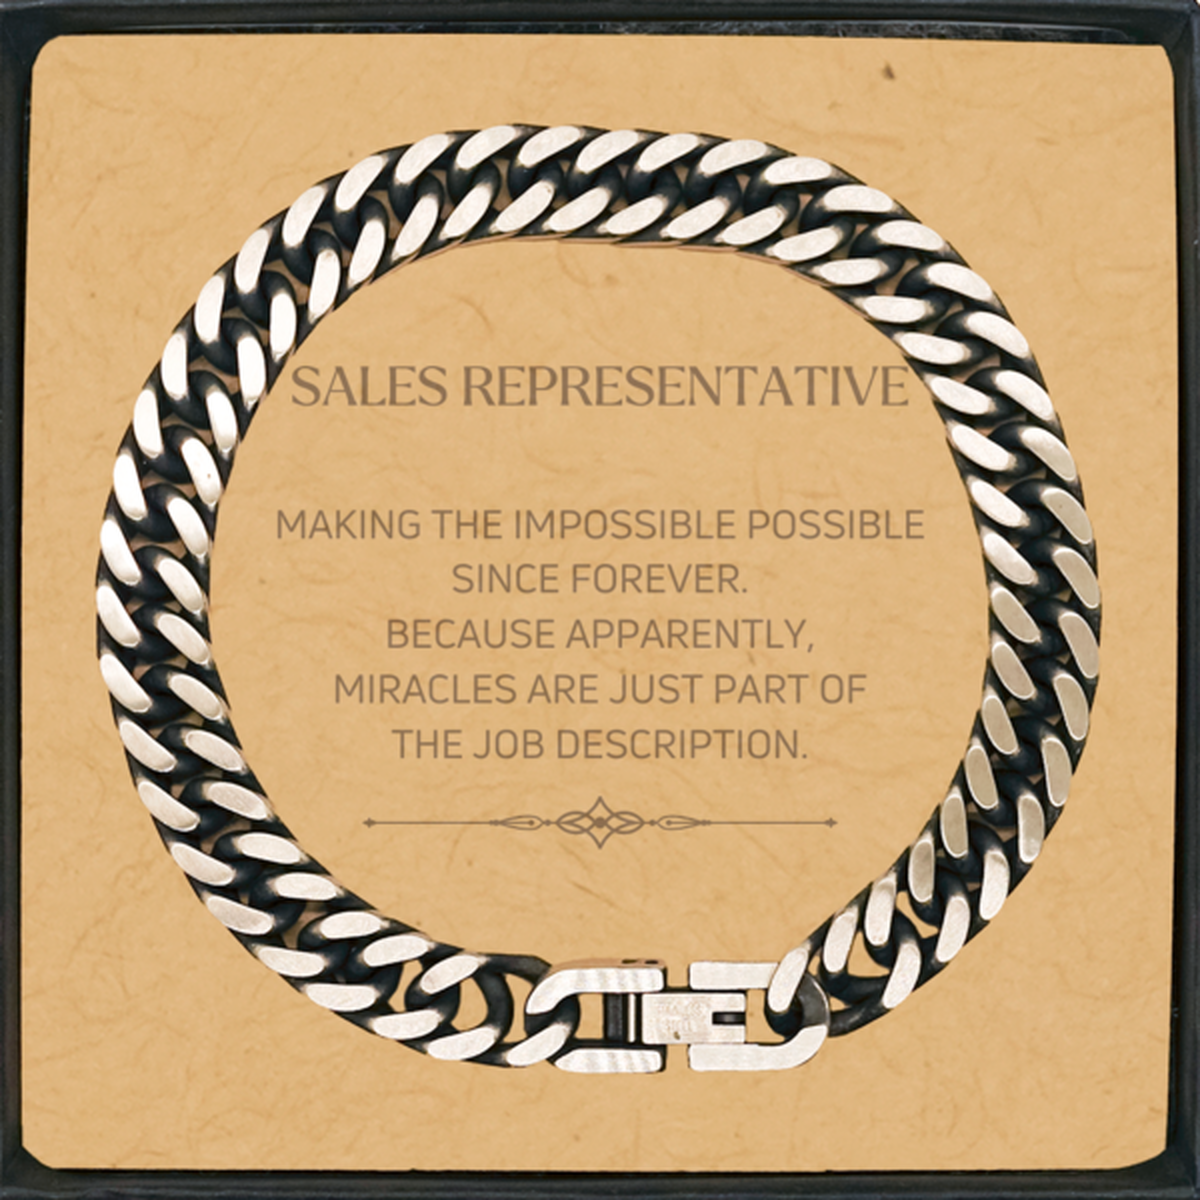 Funny Sales Representative Gifts, Miracles are just part of the job description, Inspirational Birthday Cuban Link Chain Bracelet For Sales Representative, Men, Women, Coworkers, Friends, Boss